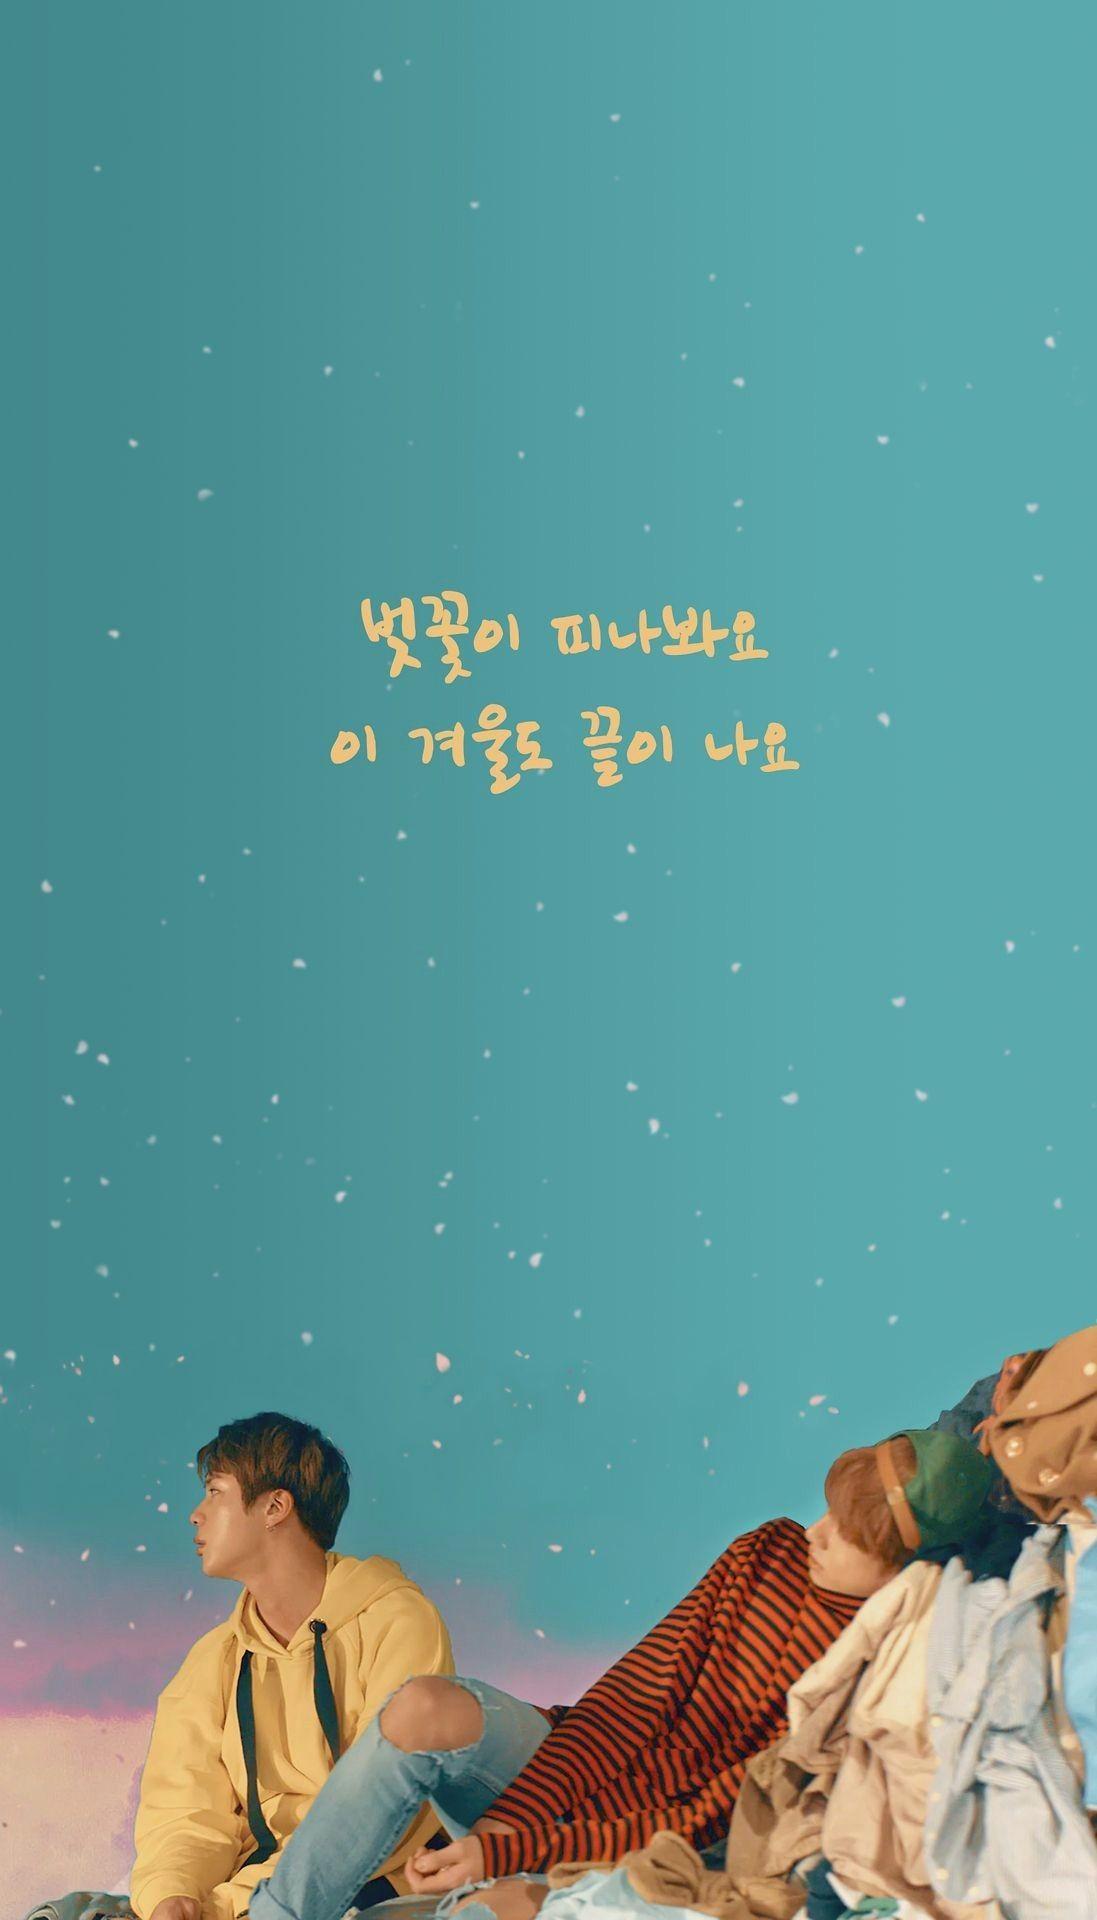 Bts Quotes From Songs Wallpaper